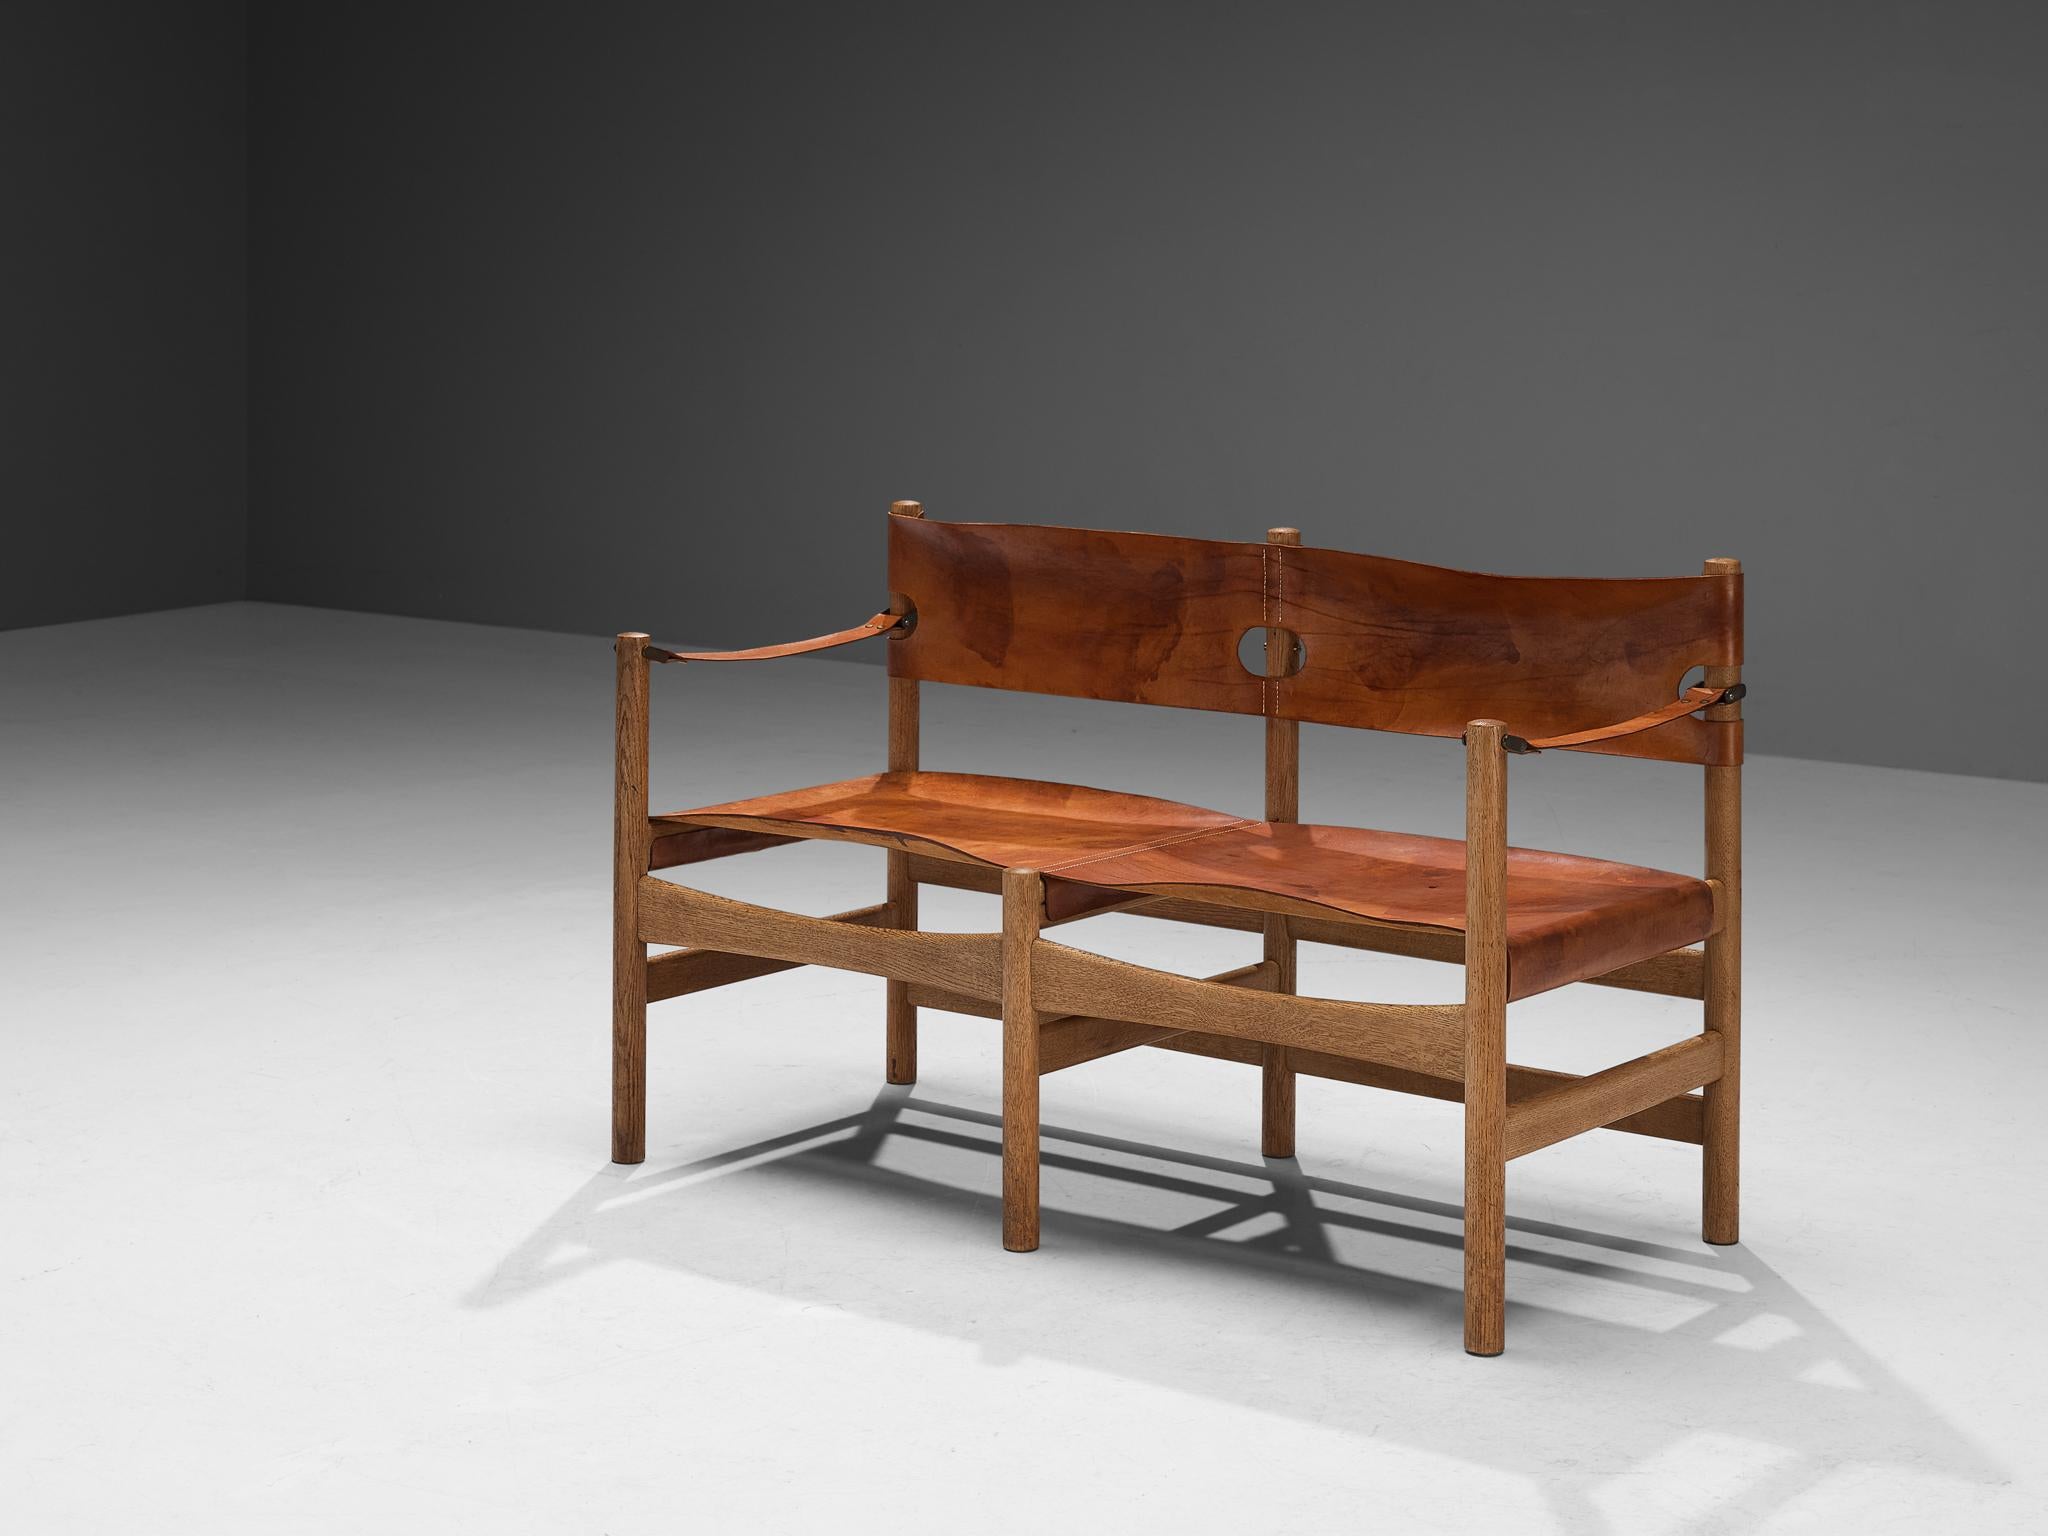 Børge Mogensen for Fredericia Stolefabrik, ‘Safari’ sofa or bench model 2222, saddle leather, oak, brass, Denmark, 1960s.

This rare sofa reminds of the classical foldable 'director-chairs', yet this design by Danish designer Børge Mogensen